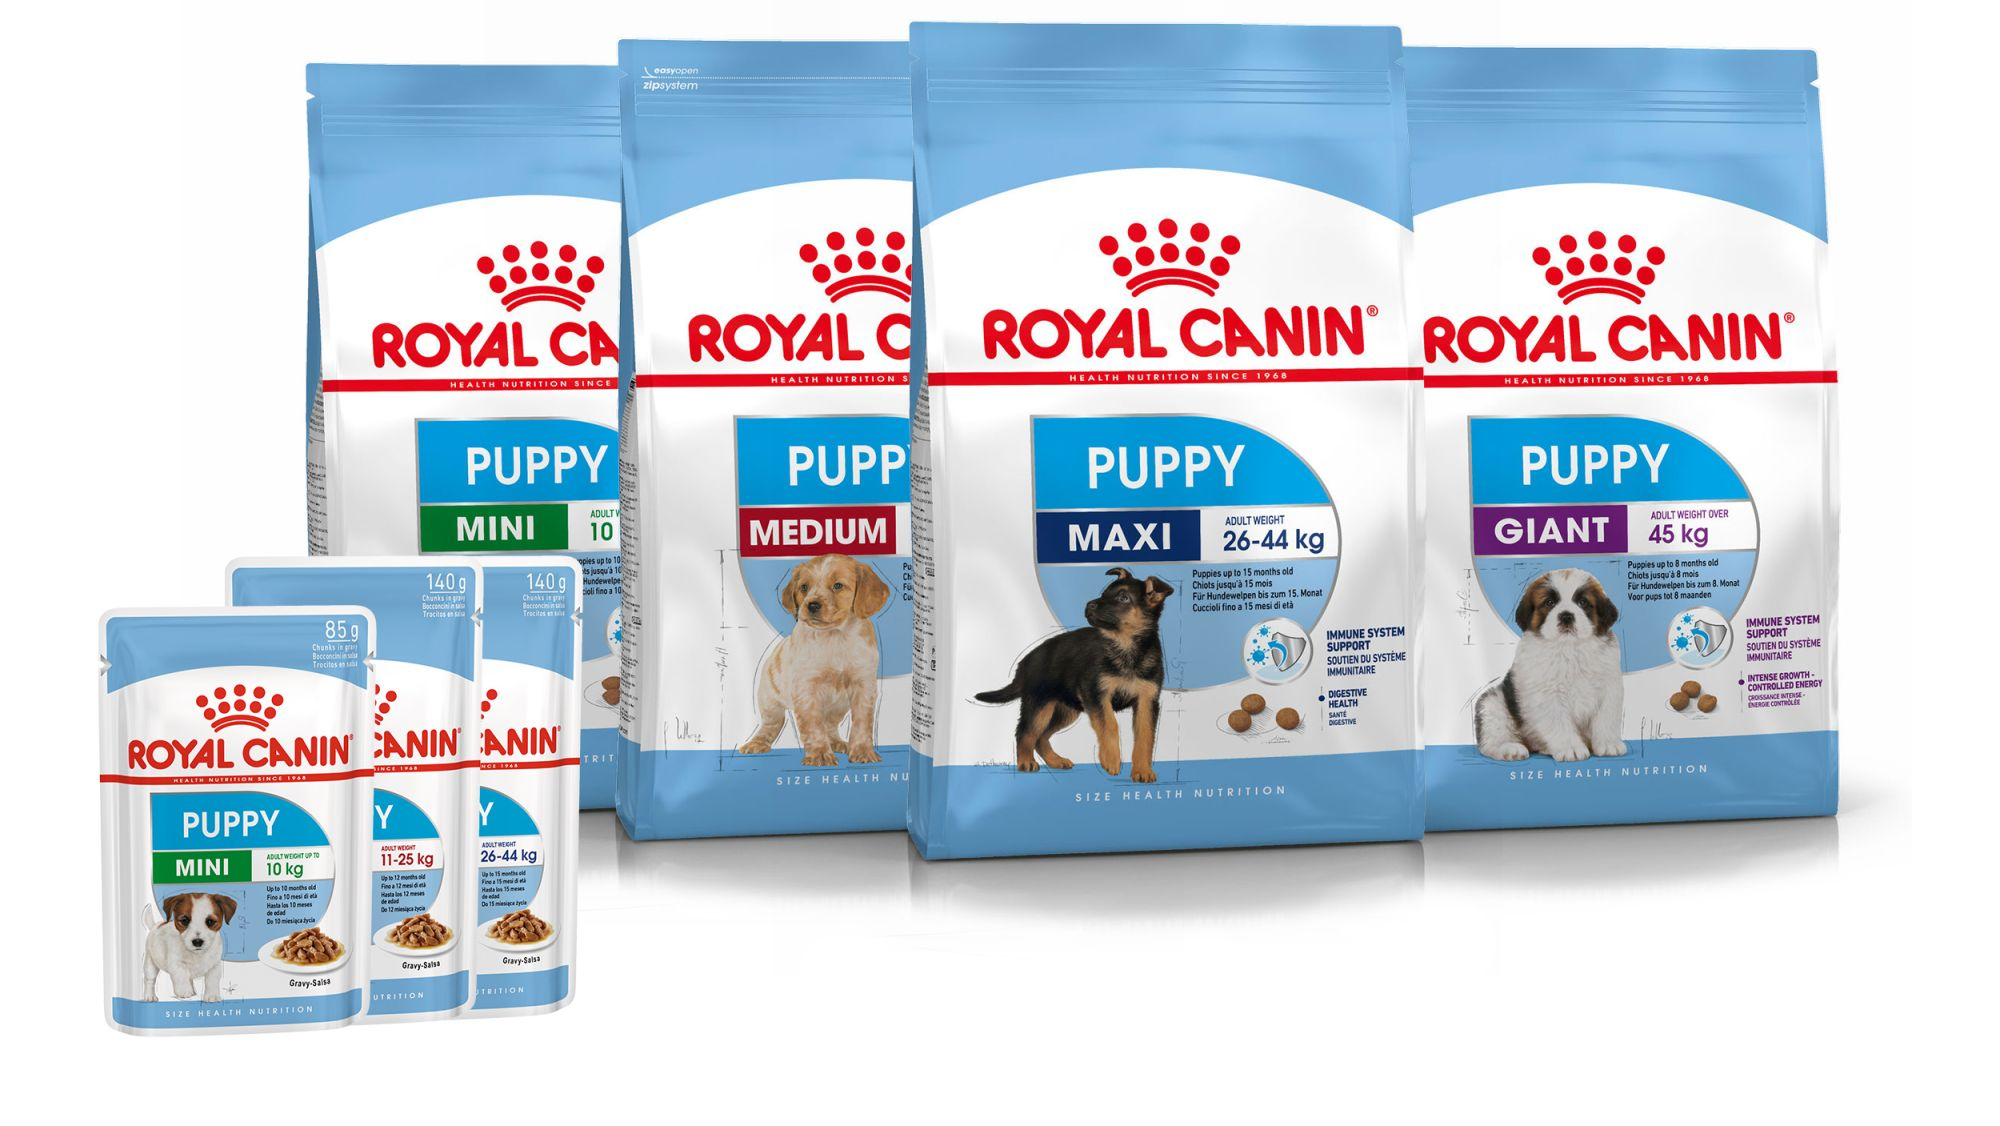 A guide to the kennel cough vaccine ROYAL CANIN